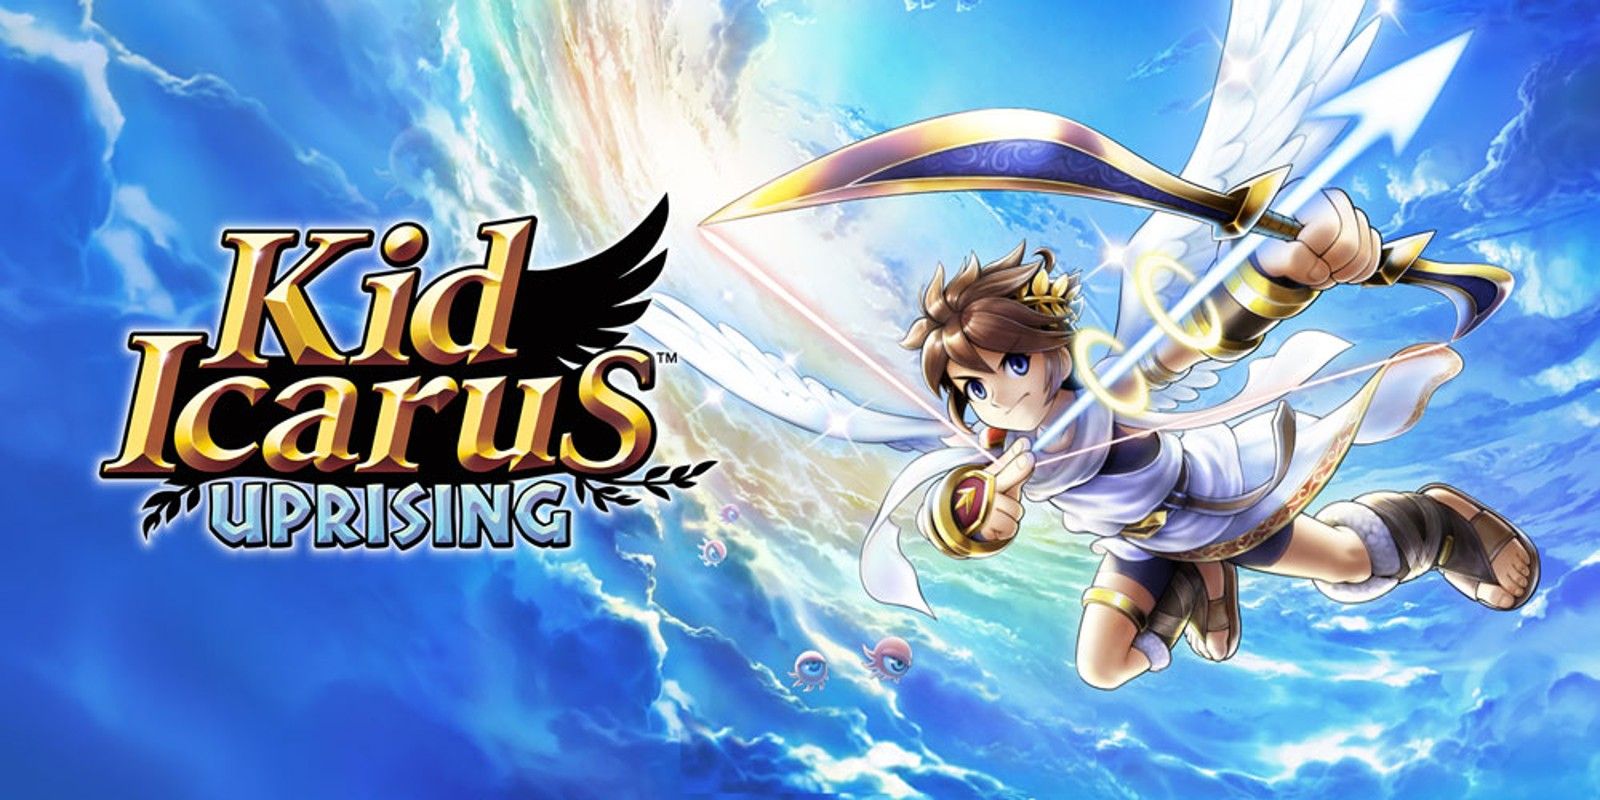 The key art for Kid Icarus Uprising